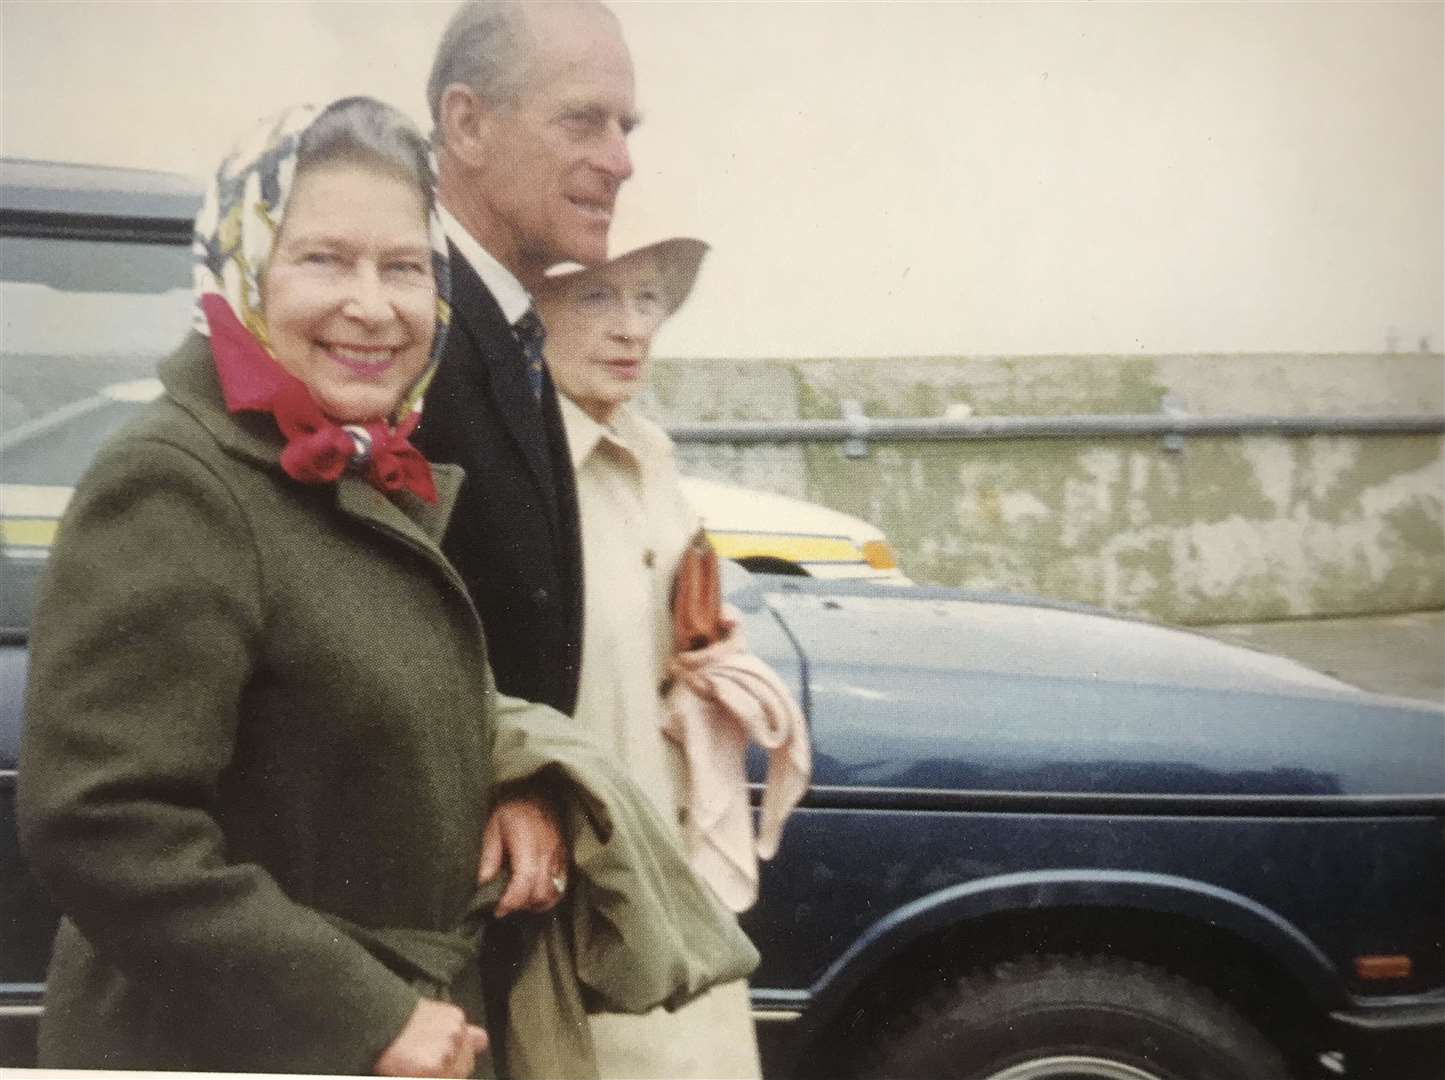 The Queen and the Duke of Edinburgh, accompanied by the Queen Mother's lady-in-waiting Ruth, Lady Fermoy, at Scrabster following a visit to the Castle of Mey in August 1992. Picture: Zena Sinclair